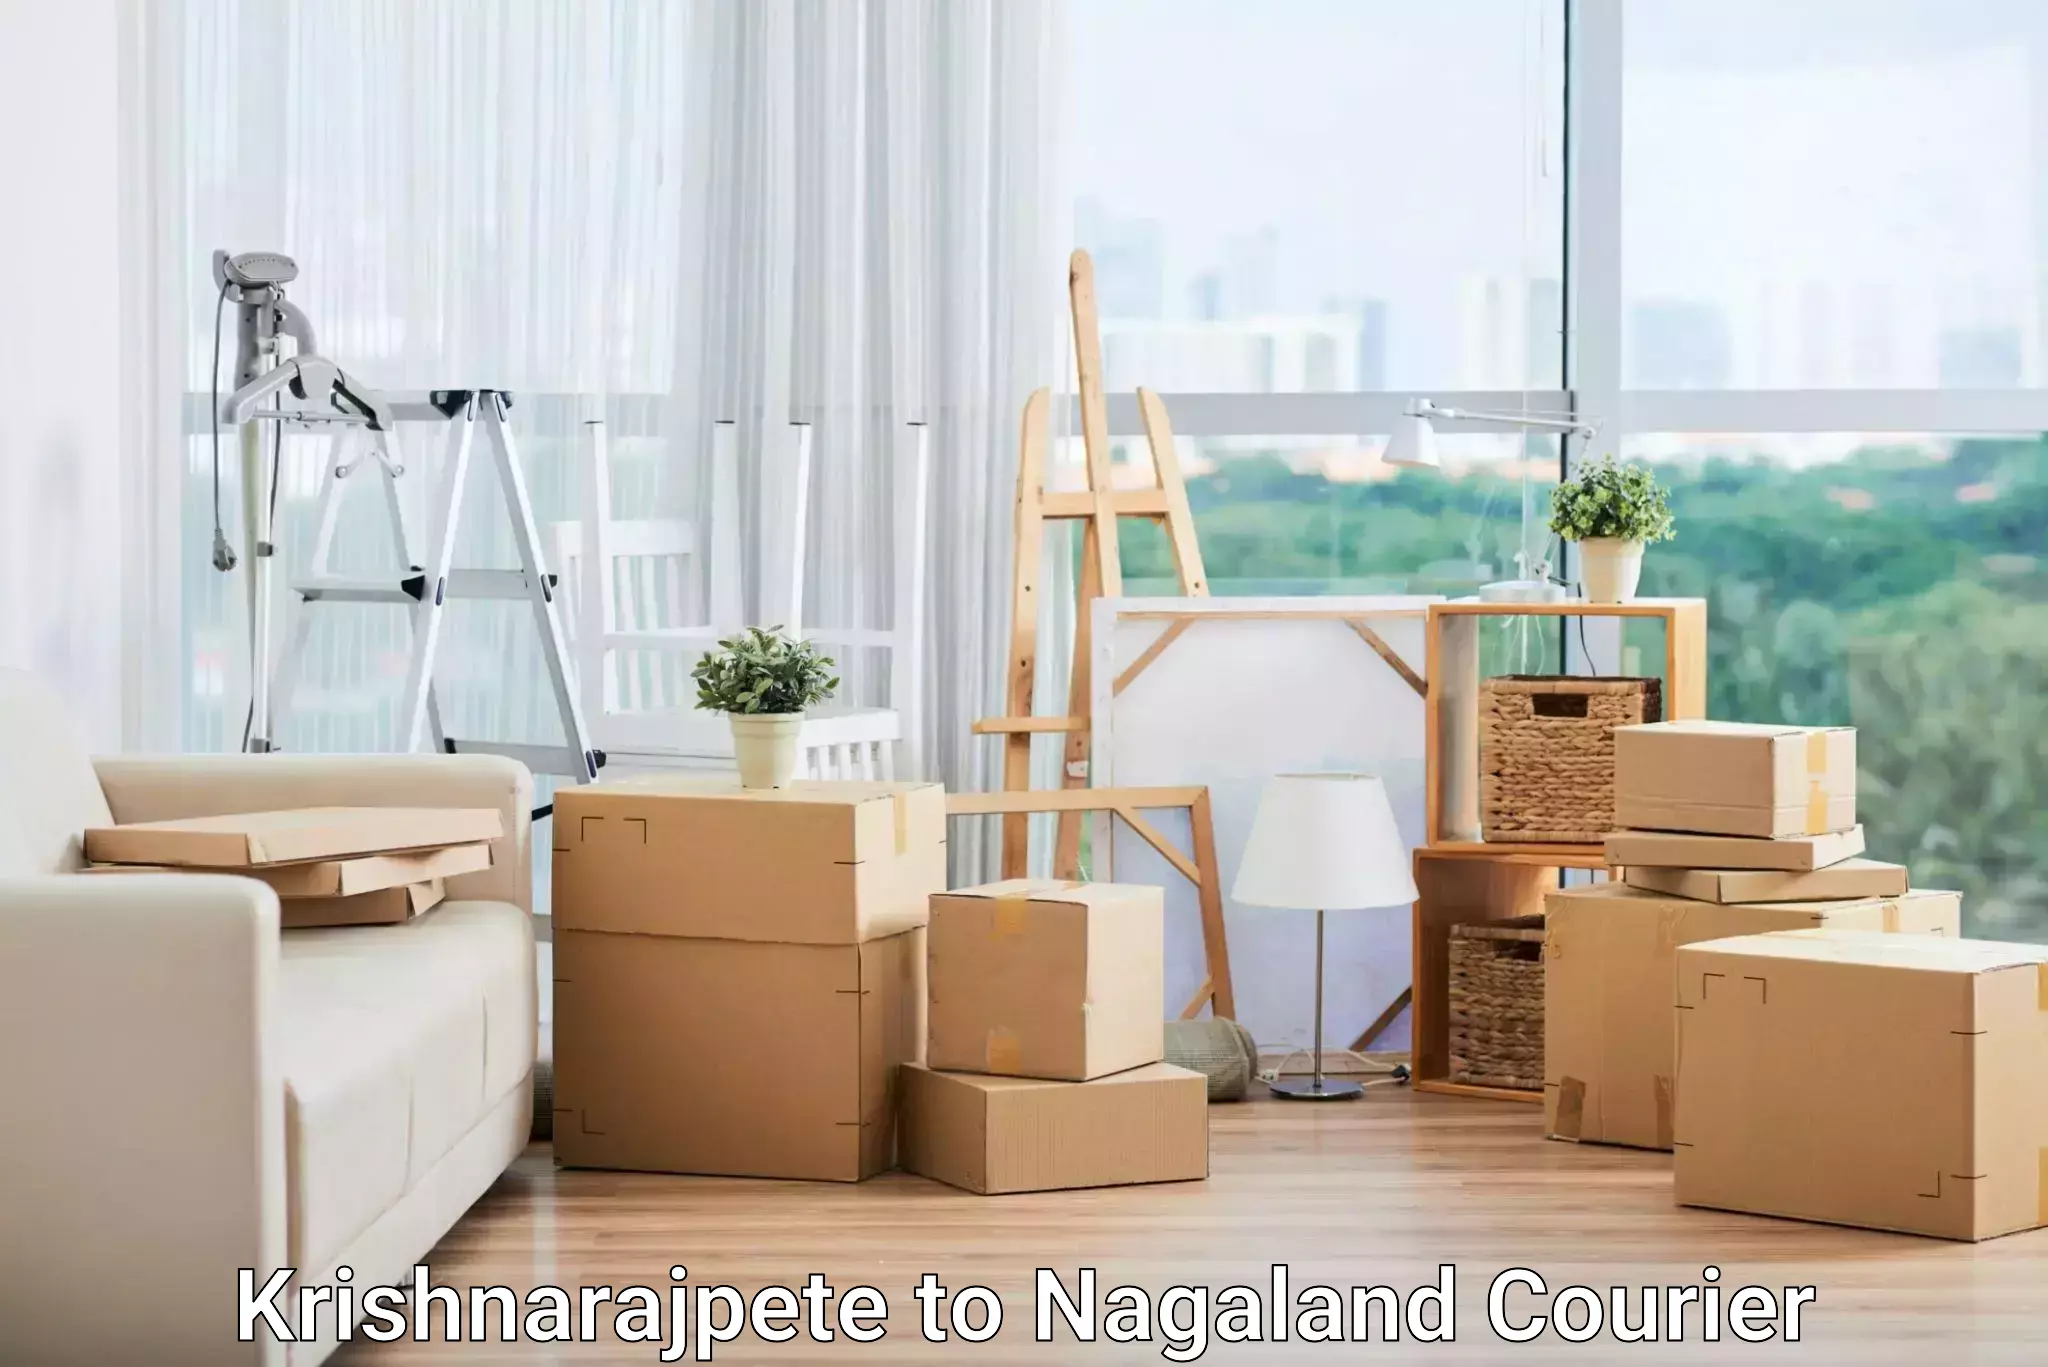 Express delivery capabilities Krishnarajpete to NIT Nagaland